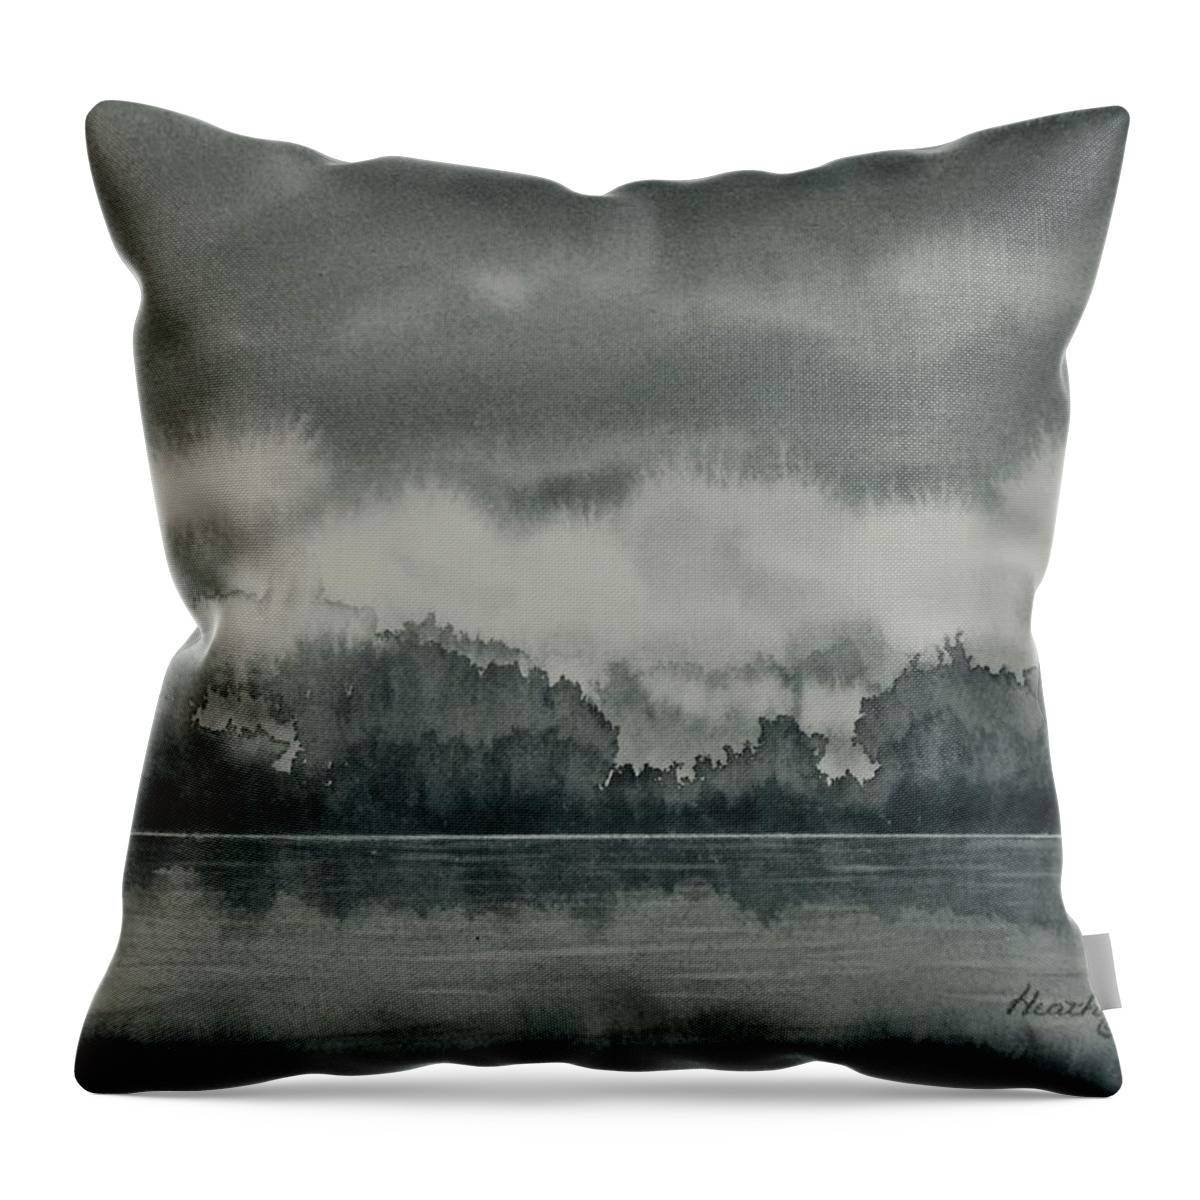 Canadian Landscape Throw Pillow featuring the painting The Quiet Before The Storm by Heather Gallup